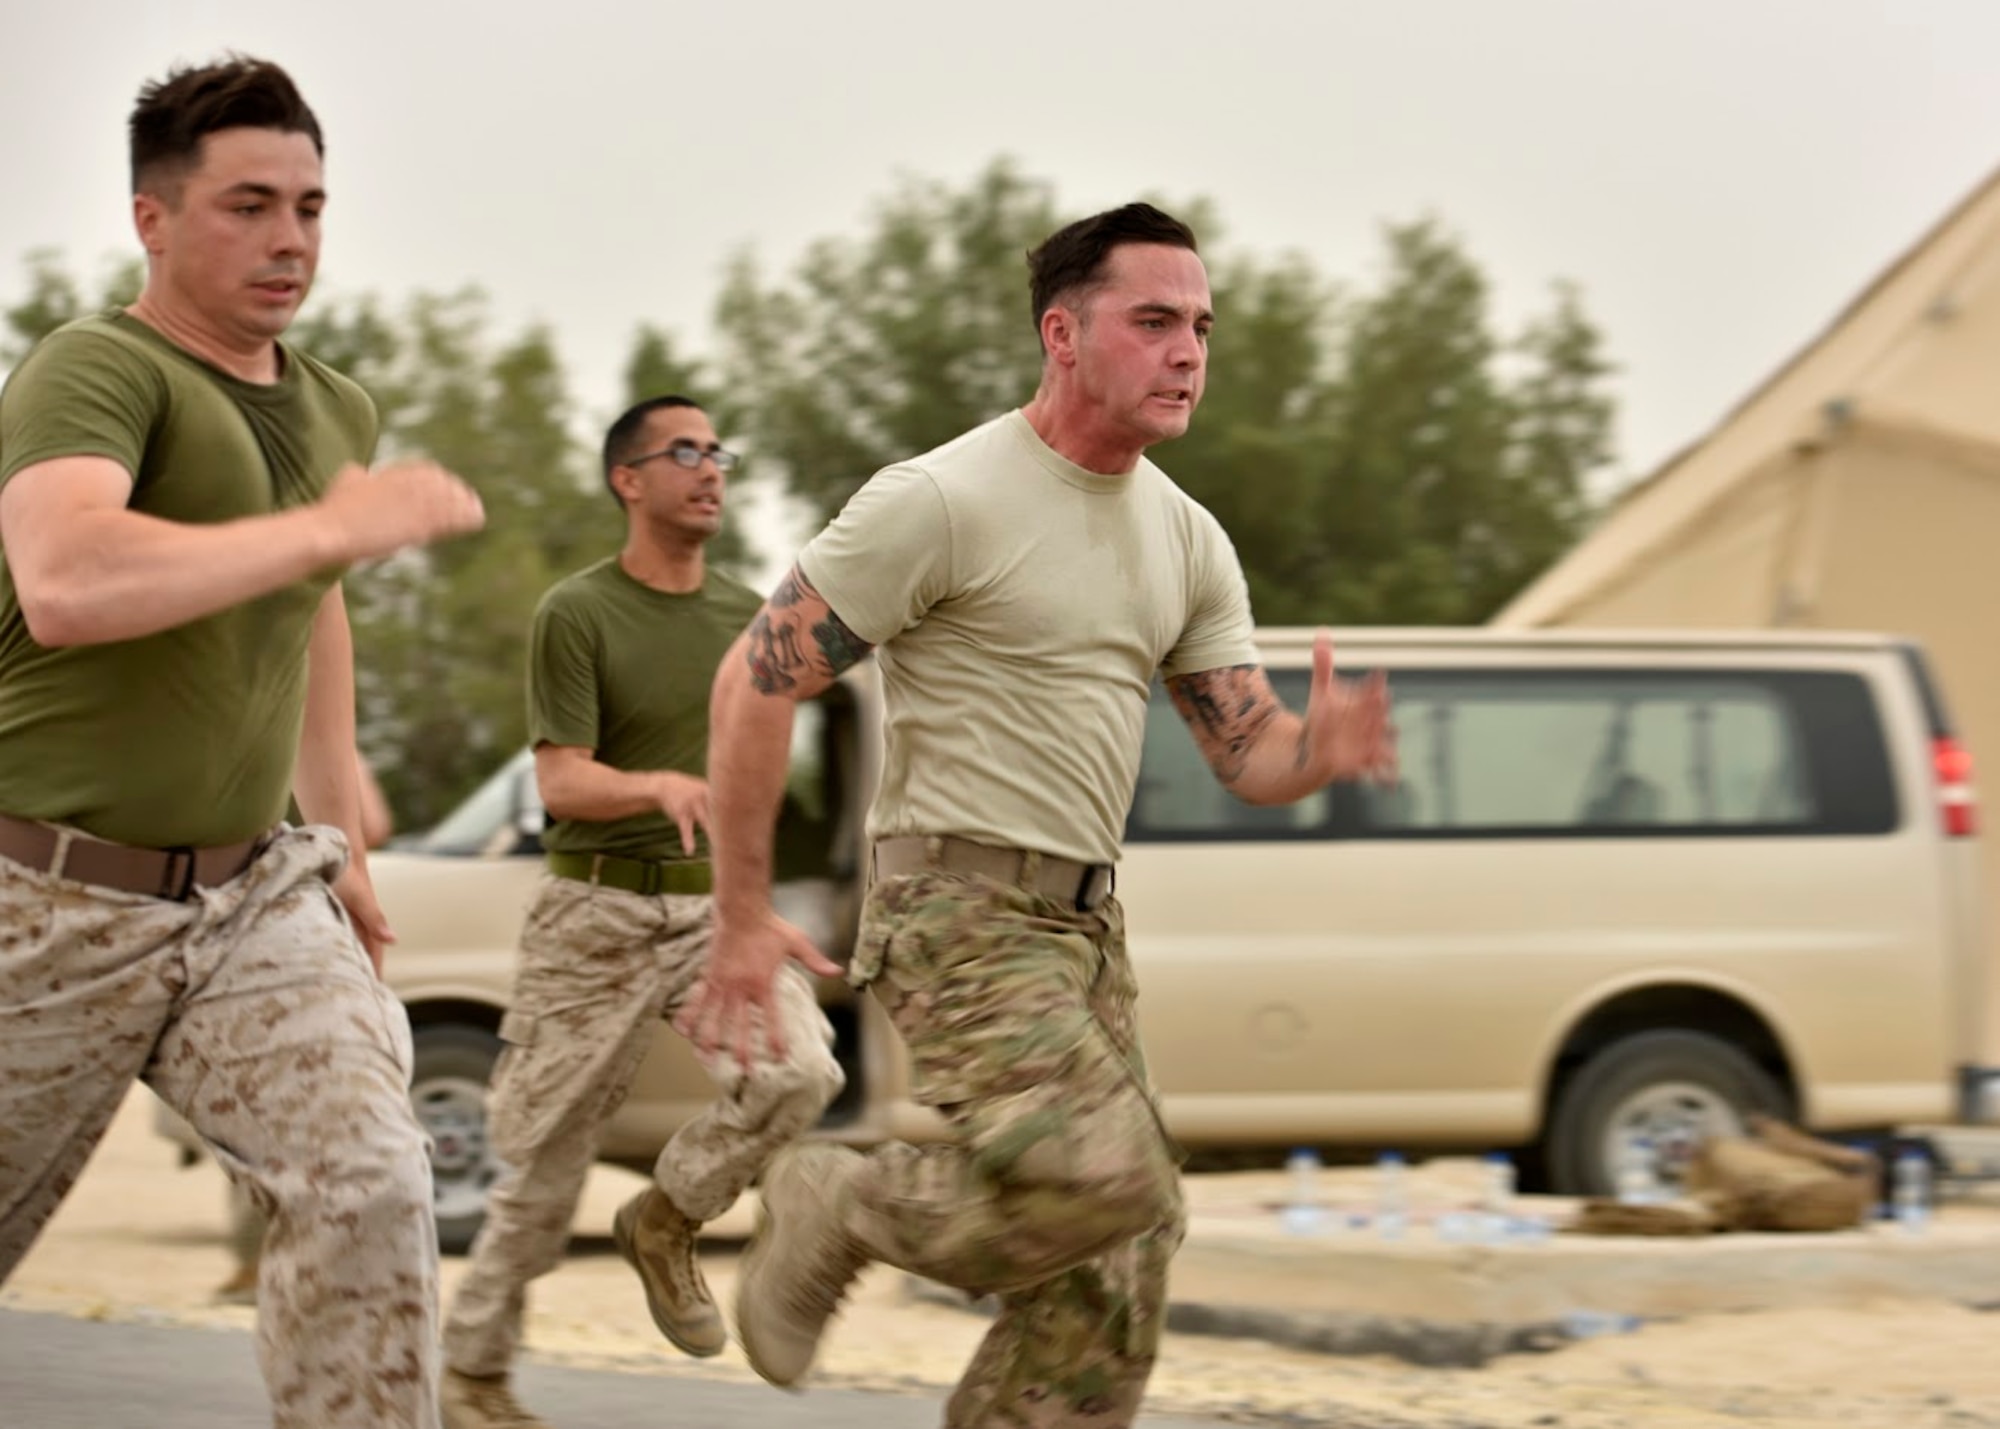 U.S. Air Force Staff Sgt. Anthony Diaz (right), 407th Expeditionary Logistic Readiness Squadron ground transportation journeyman, races Marines during a Corporal’s Course physical training session April 29, 2017. The corporal’s course is a 14-day formal training event designed to educate Marine corporals on the duties and responsibilities of an NCO. Deployed Airmen were granted the opportunity to attend the course, which is an eligibility requirement for Marines before promoting to the rank of sergeant. (U.S. Air Force photo by Senior Airman Ramon A. Adelan)